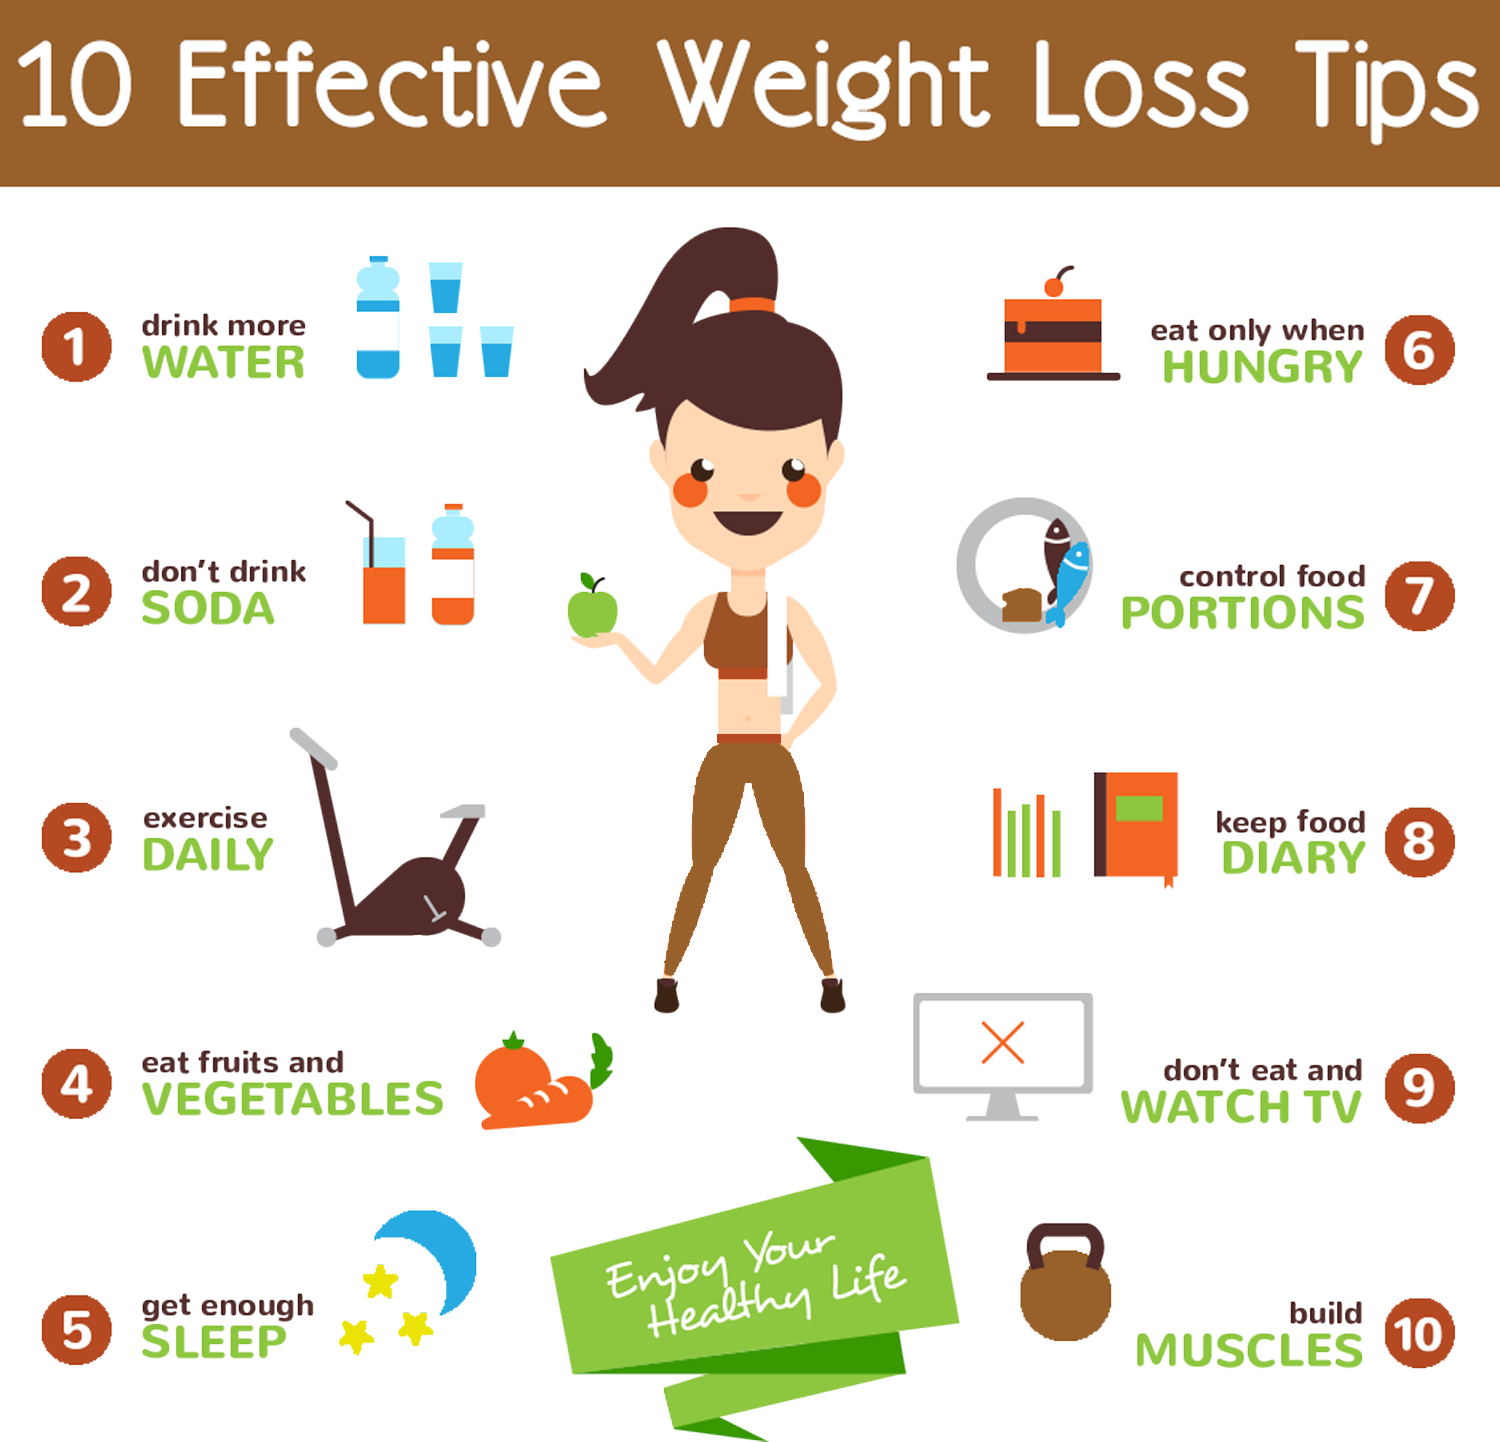 https://www.culinaryschools.org/images/10-effective-weight-loss-tips.png